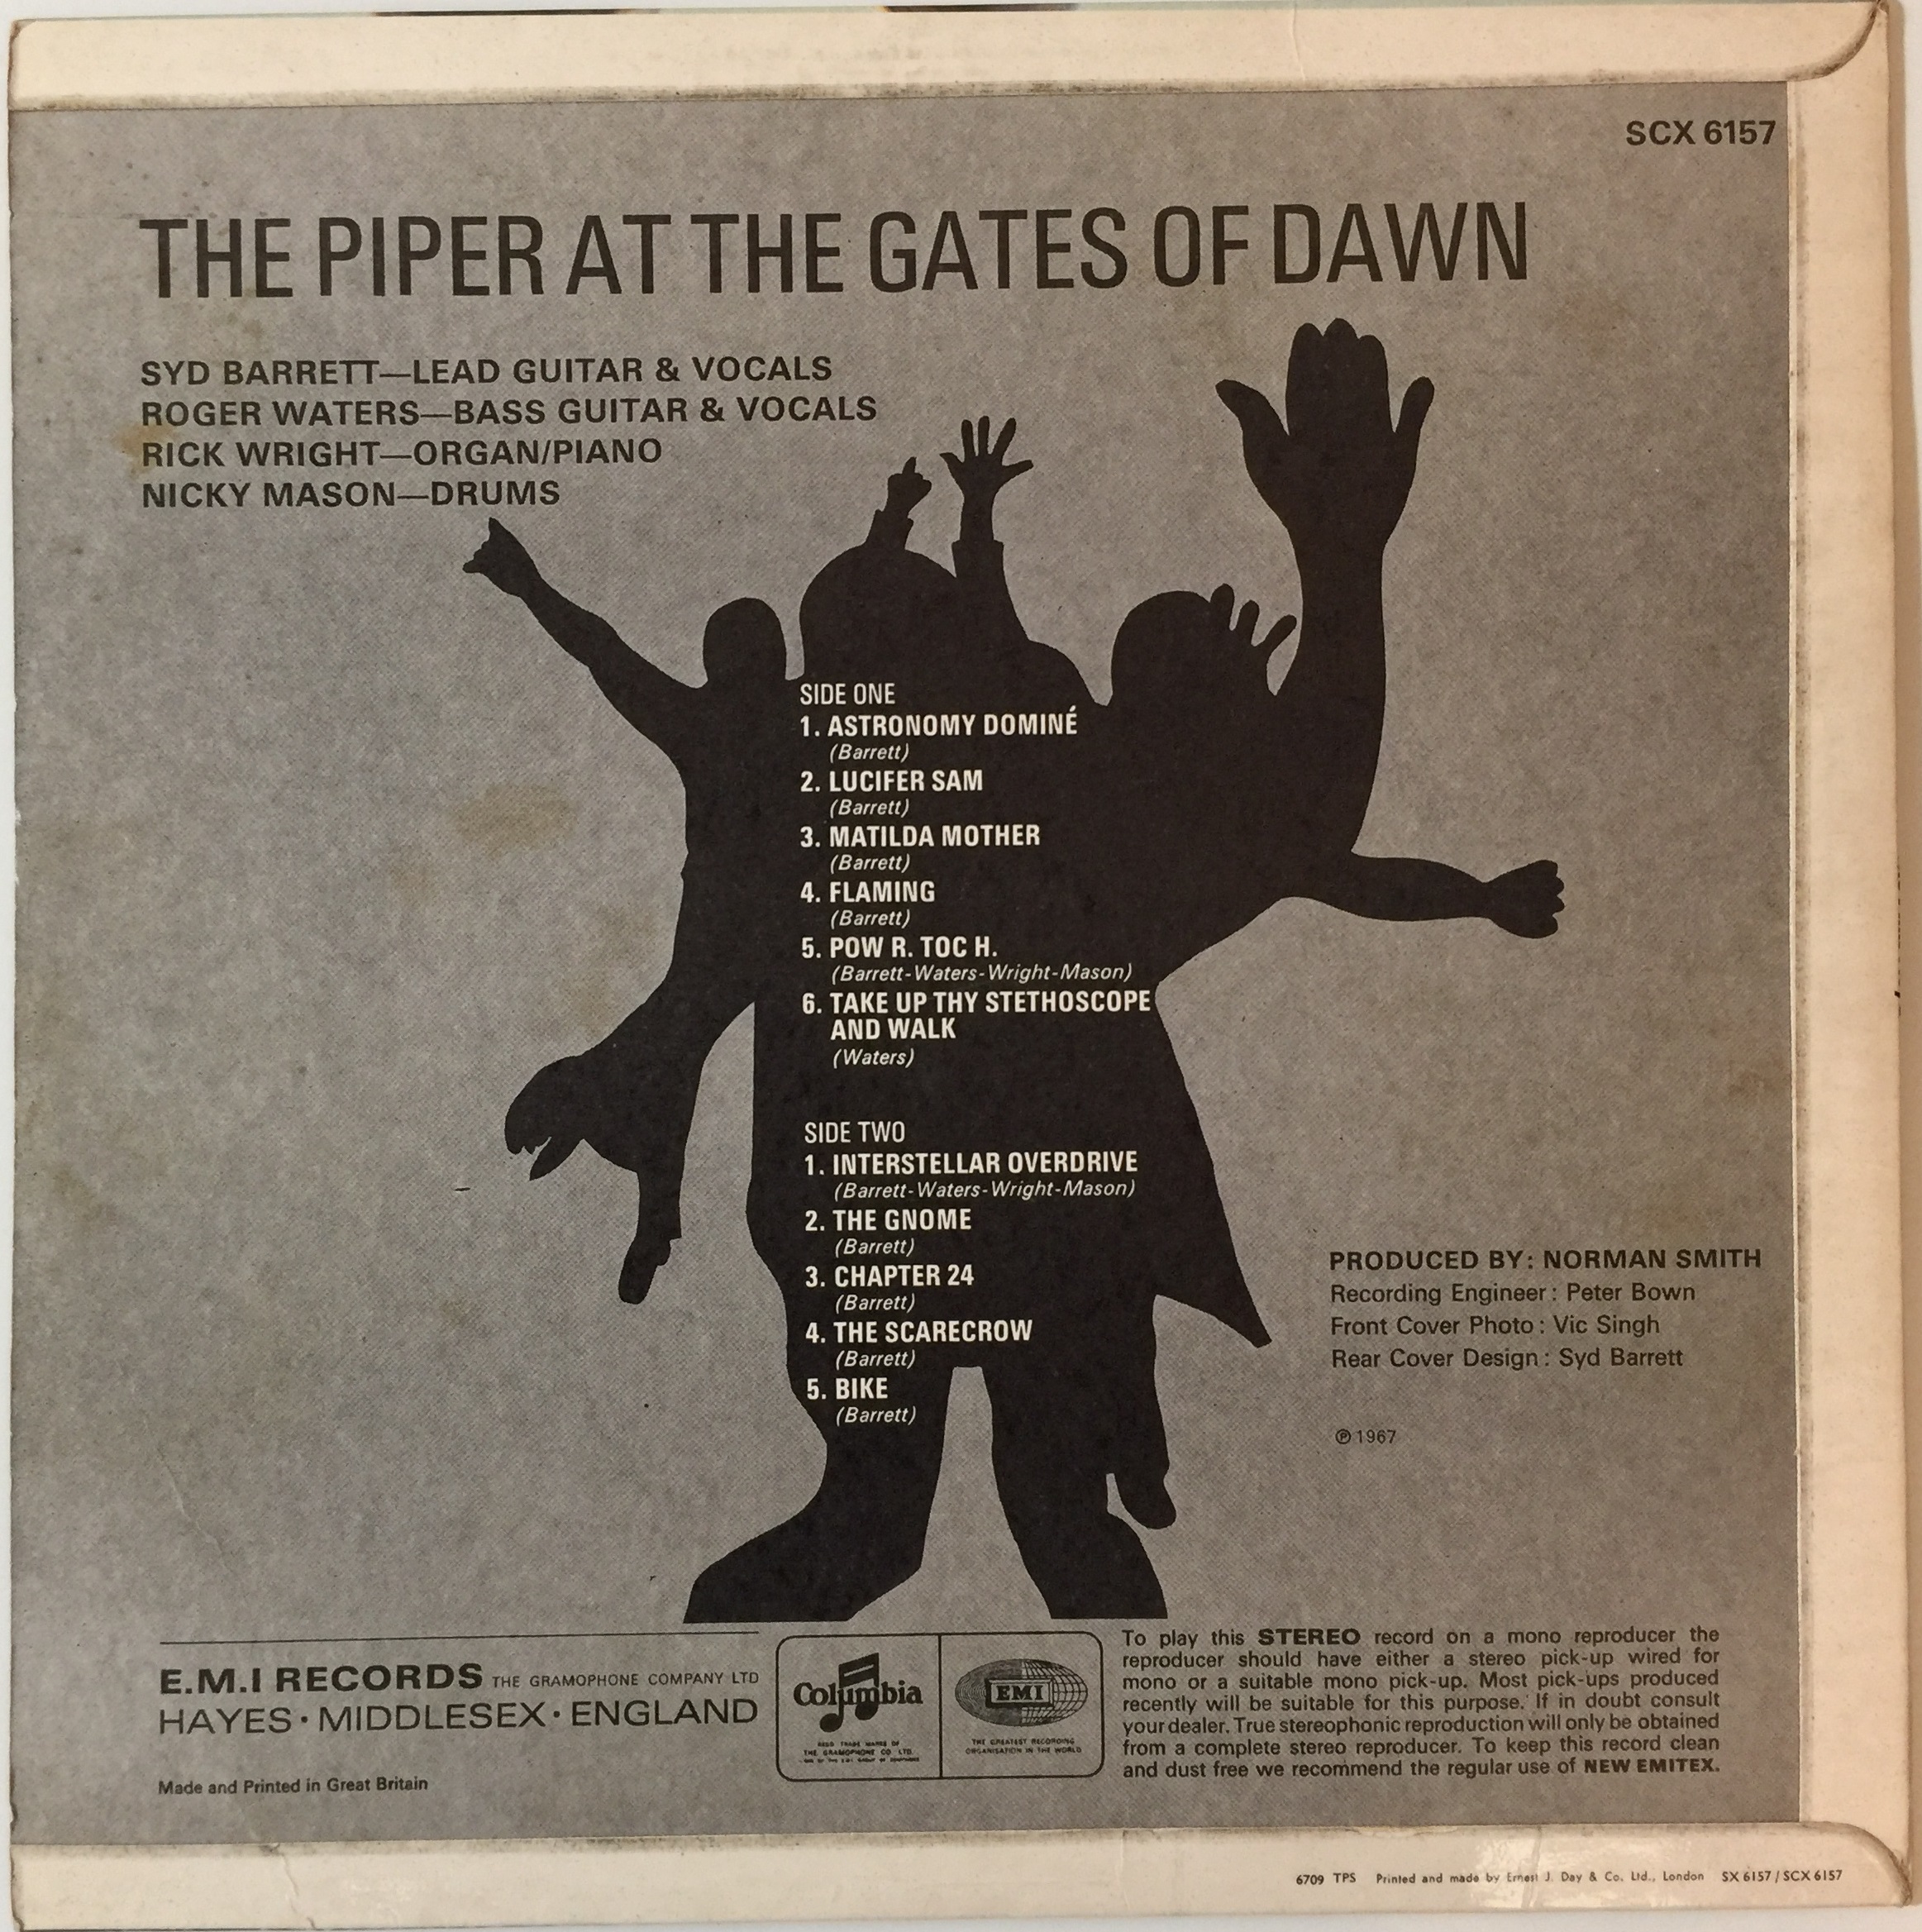 PINK FLOYD - THE PIPER AT THE GATES OF DAWN LP (ORIGINAL UK STEREO PRESSING - COLUMBIA SCX 6157). - Image 2 of 4